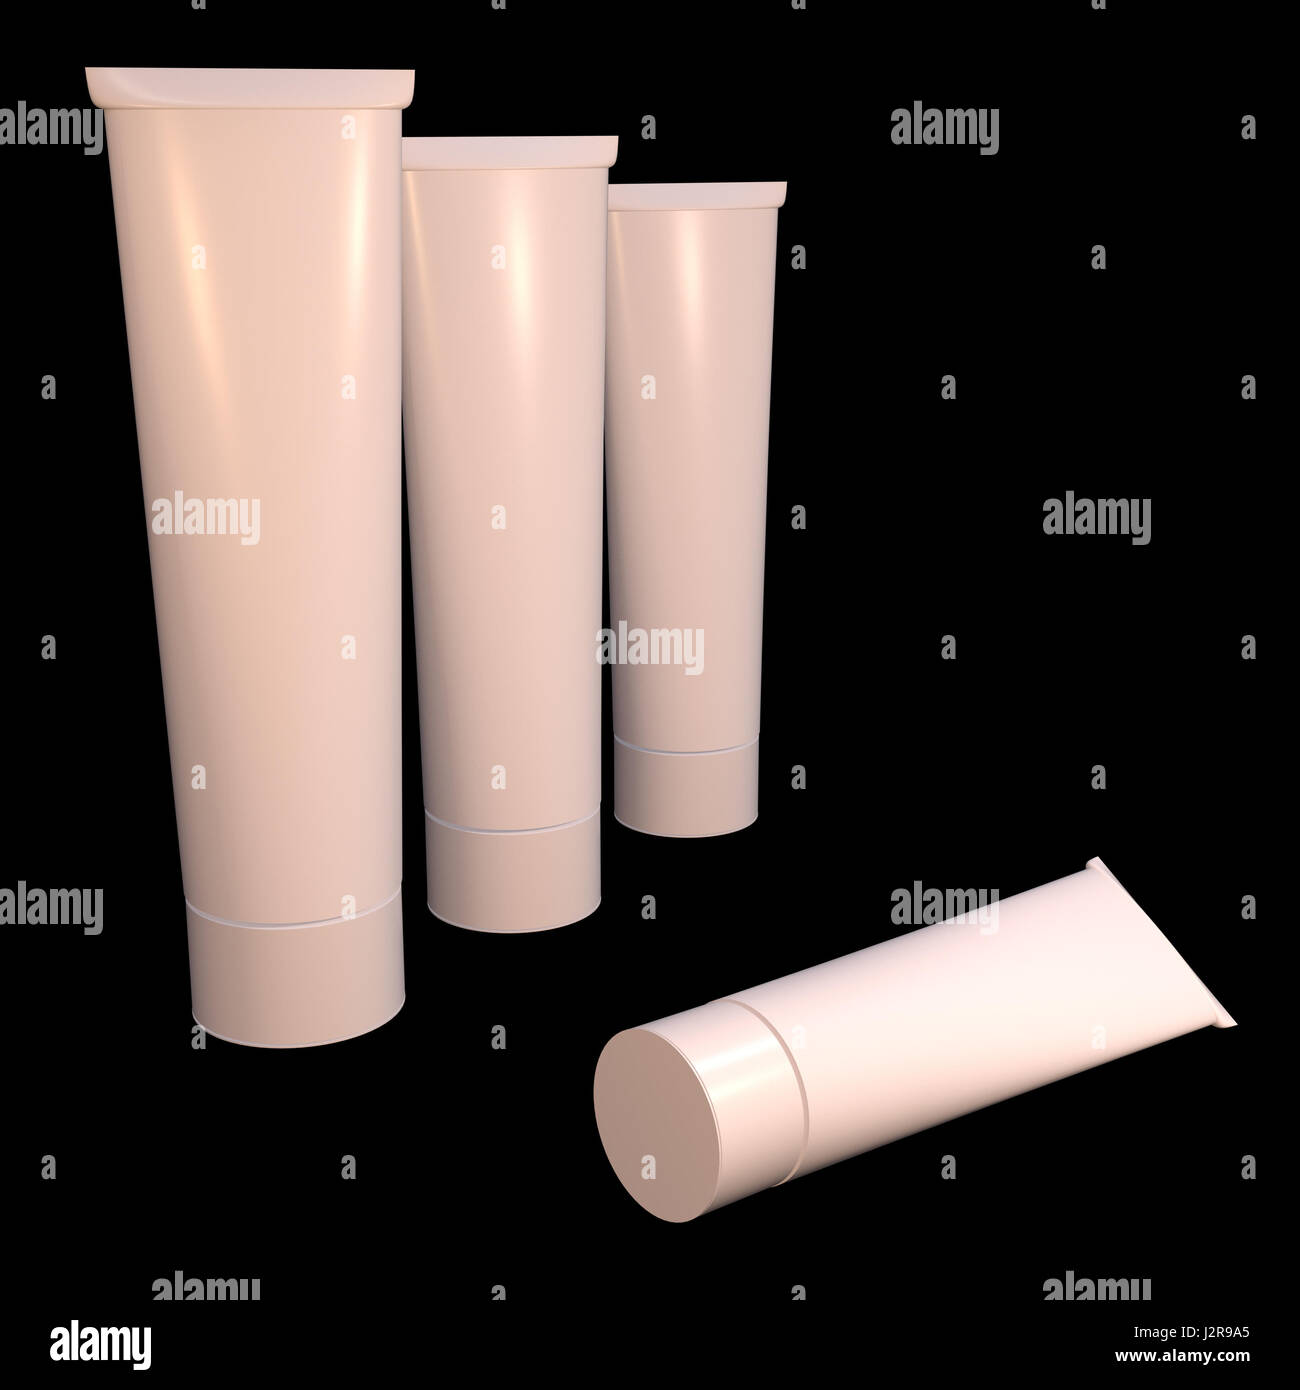 cosmetic aids products in tubes 3d illustration Stock Photo